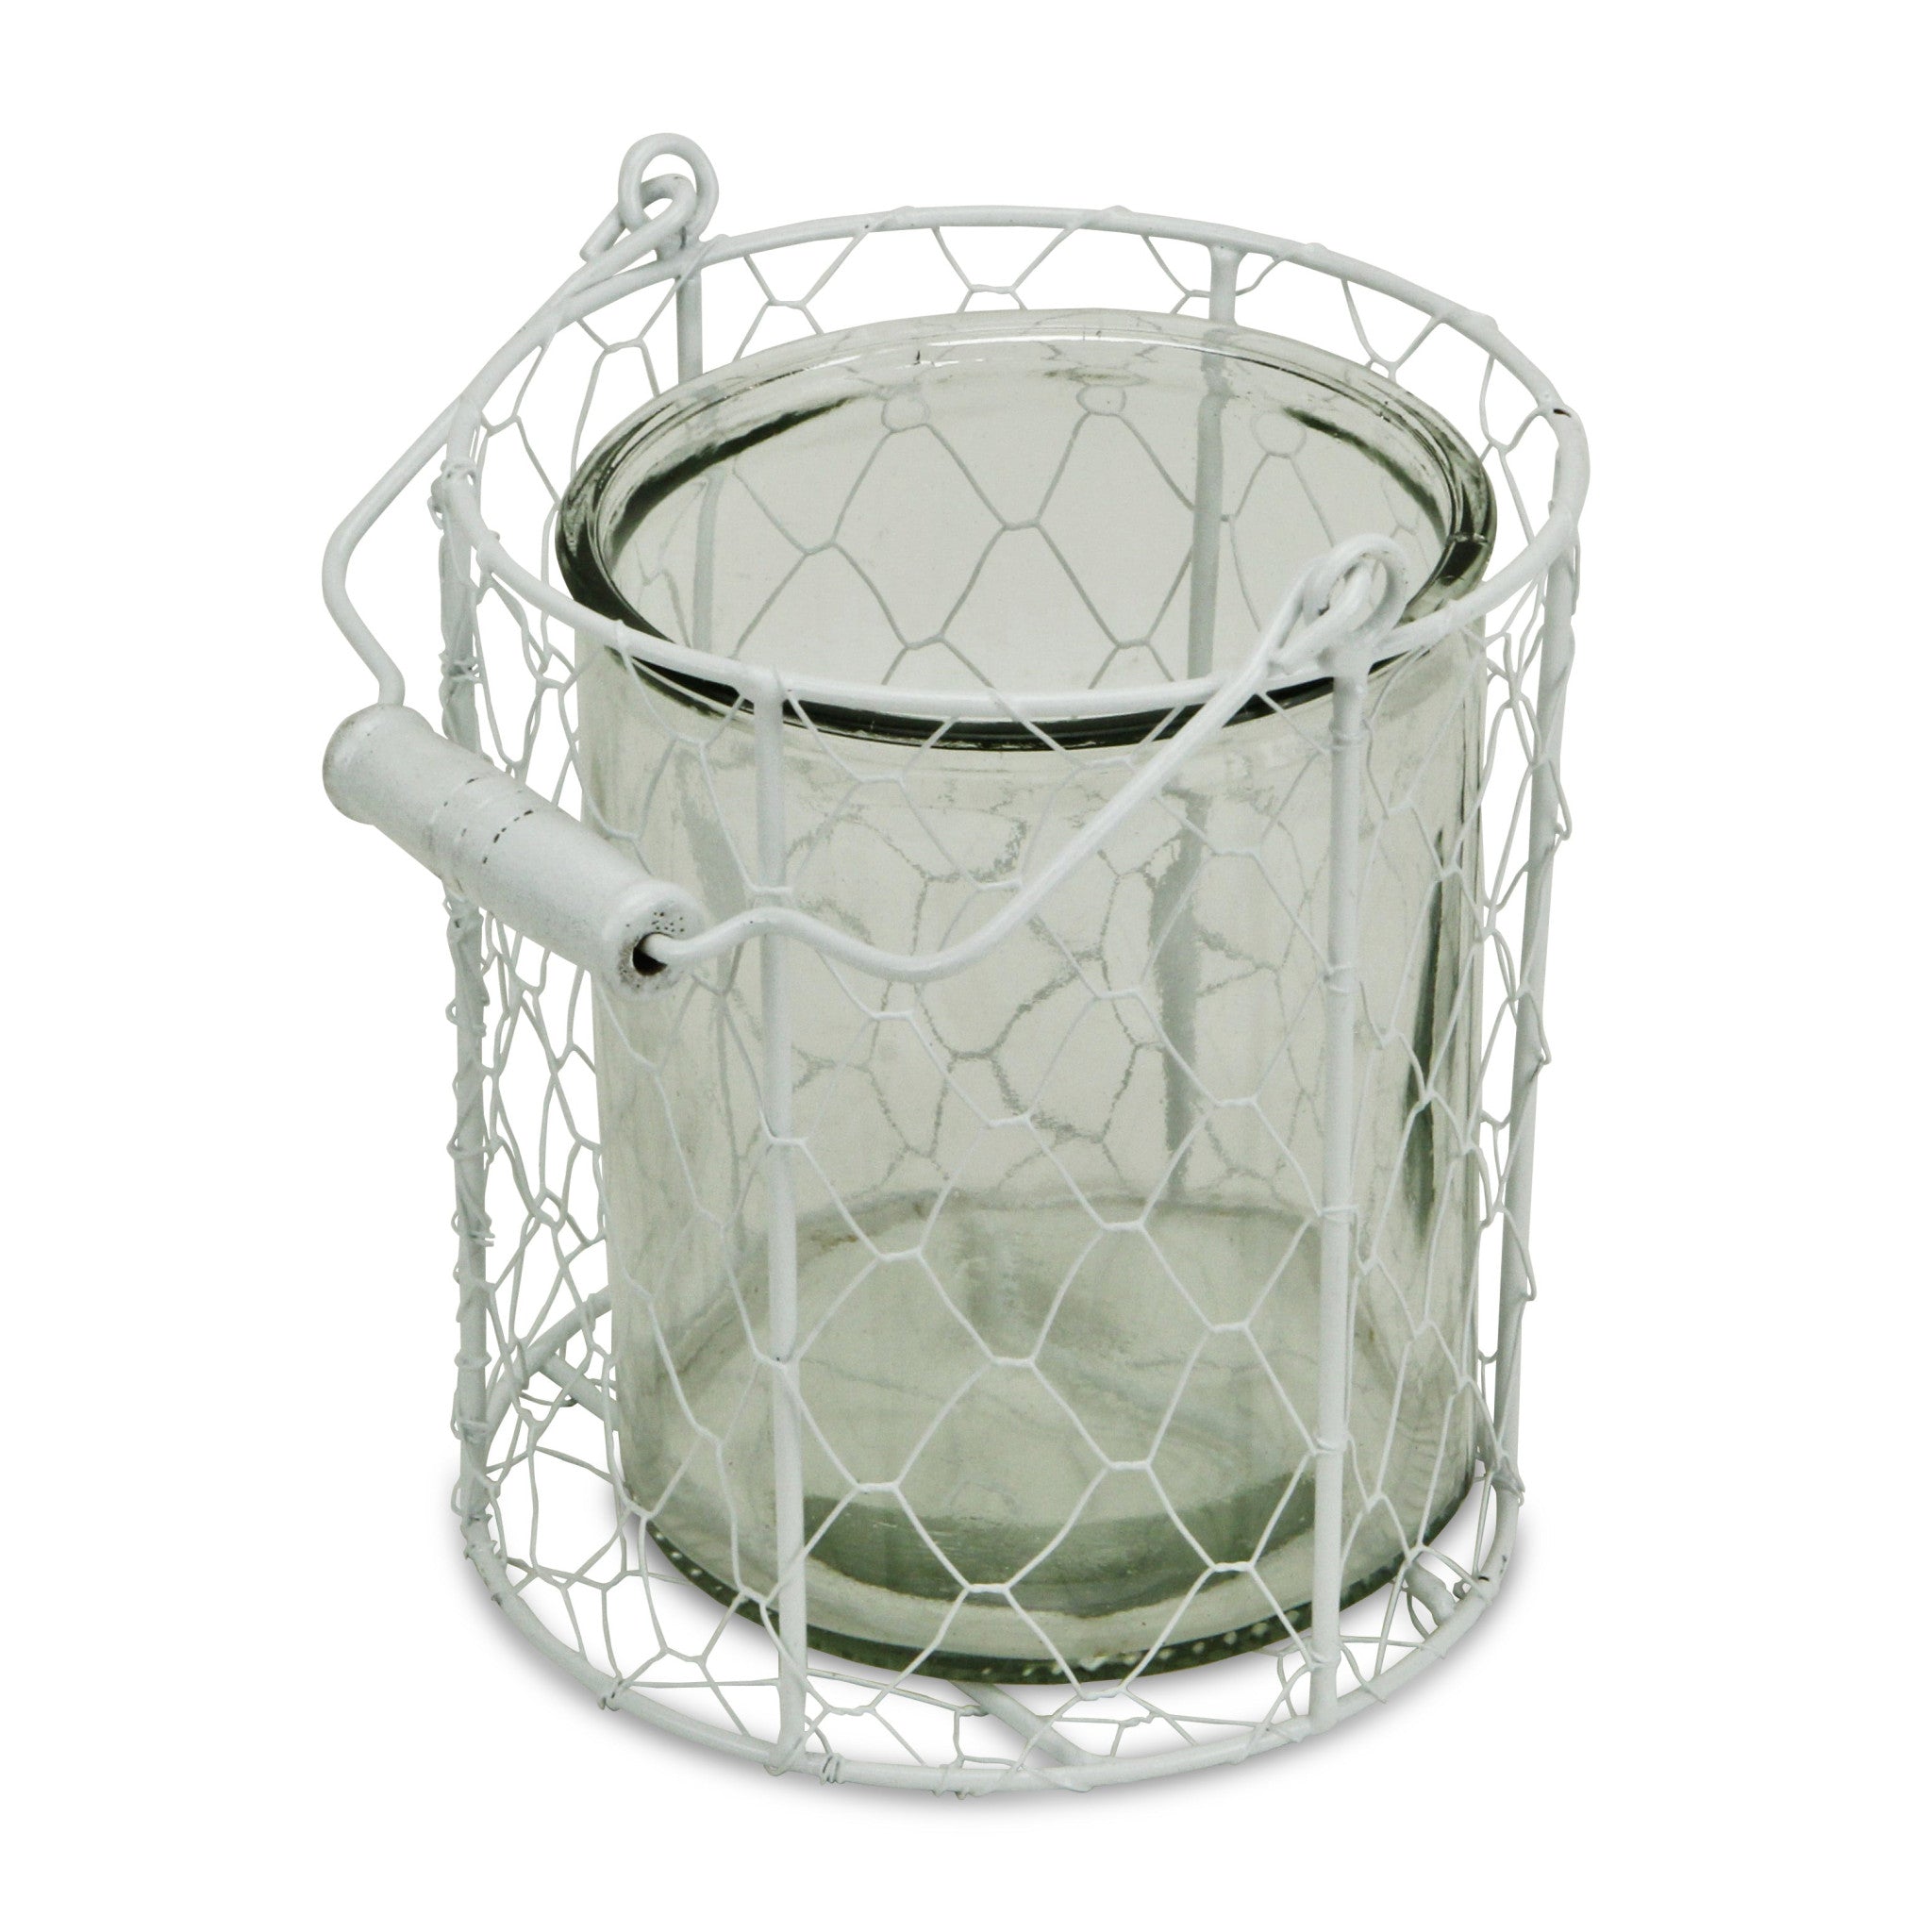 6" White and Clear Wire Basket and Glass Jar